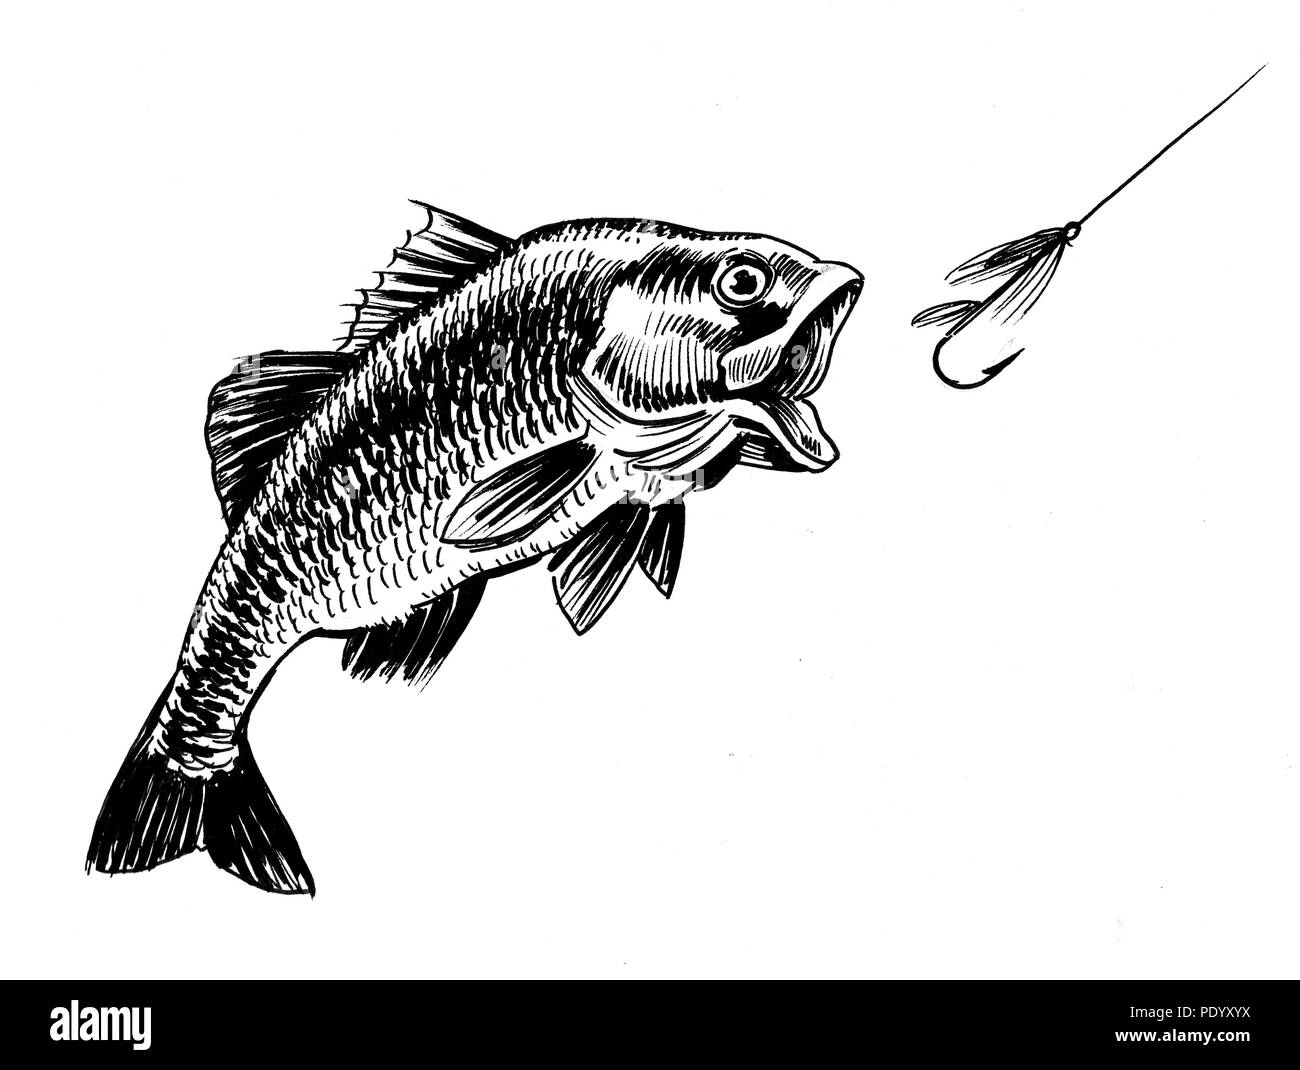 Fish hook drawing Black and White Stock Photos & Images - Alamy